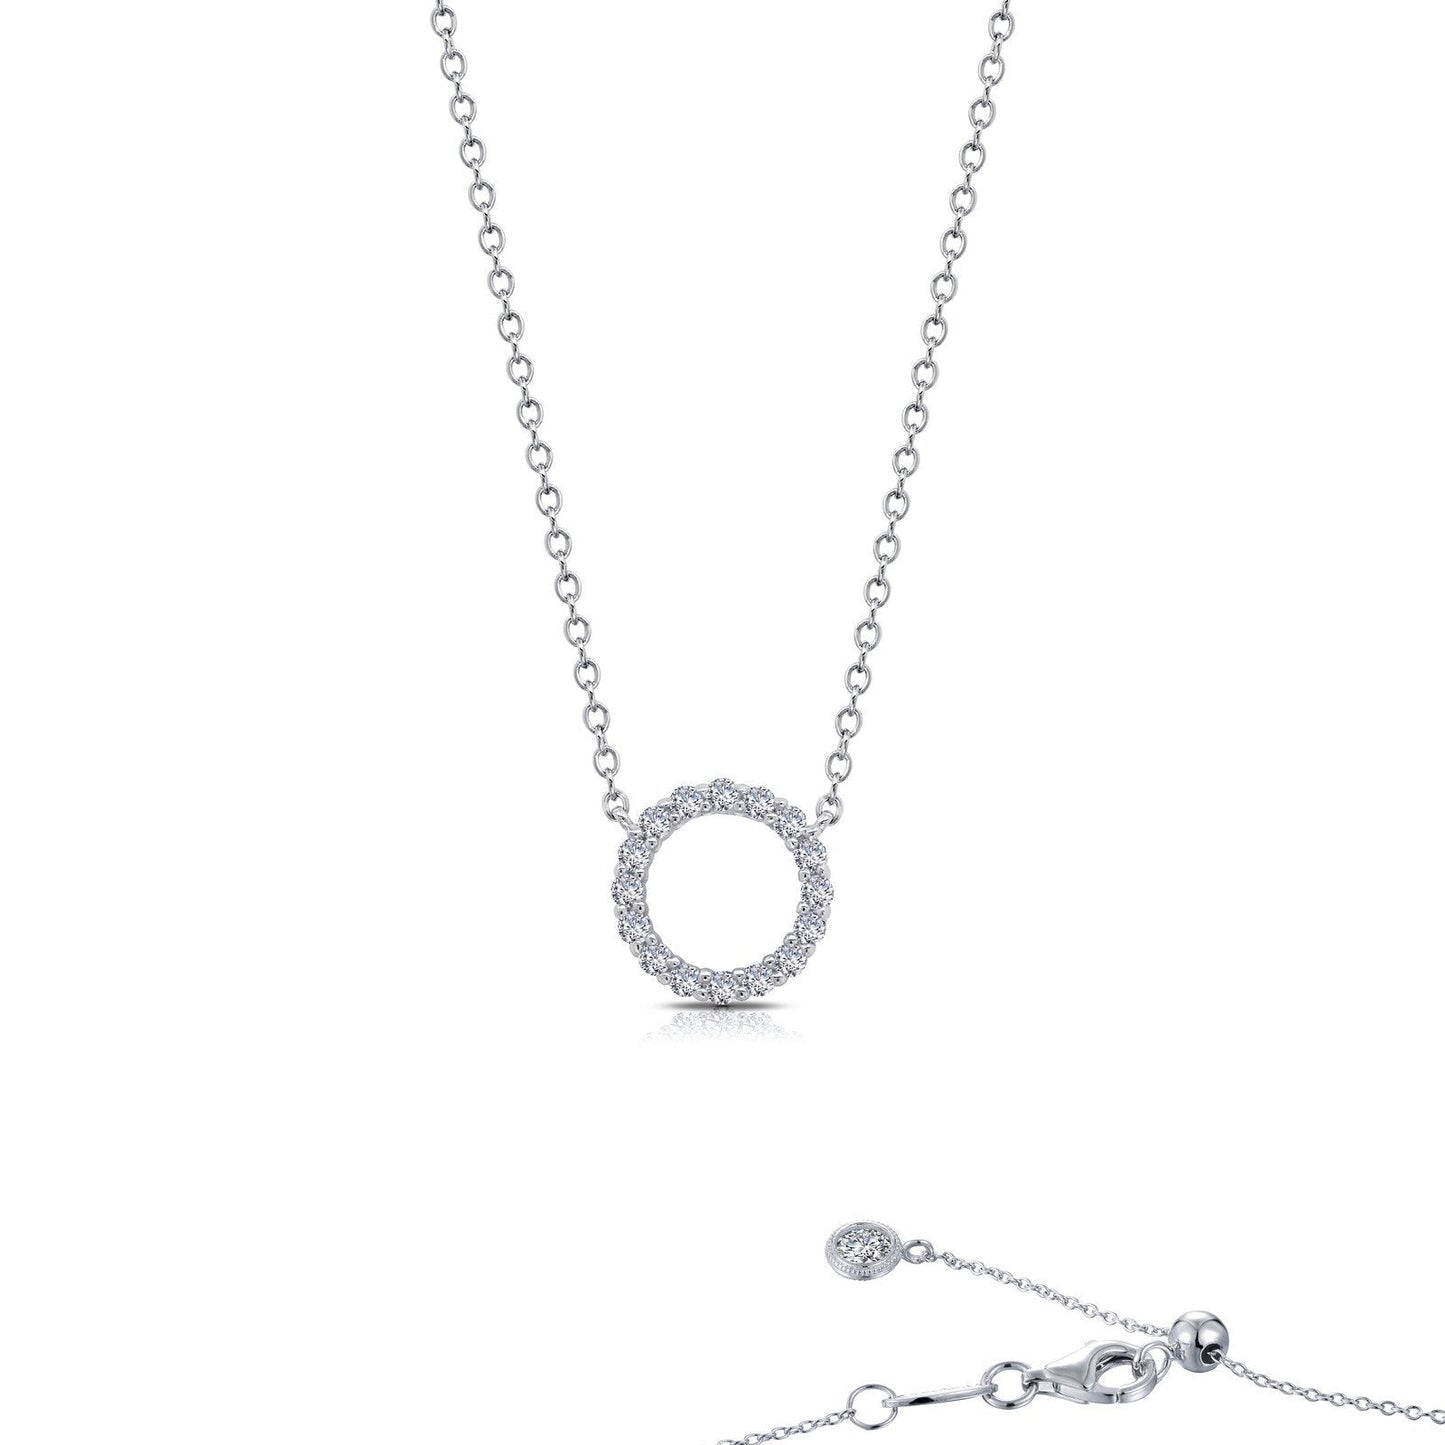 Load image into Gallery viewer, LaFonn Platinum Simulated Diamond N/A NECKLACES 0.41 CTW Open Circle Necklace
